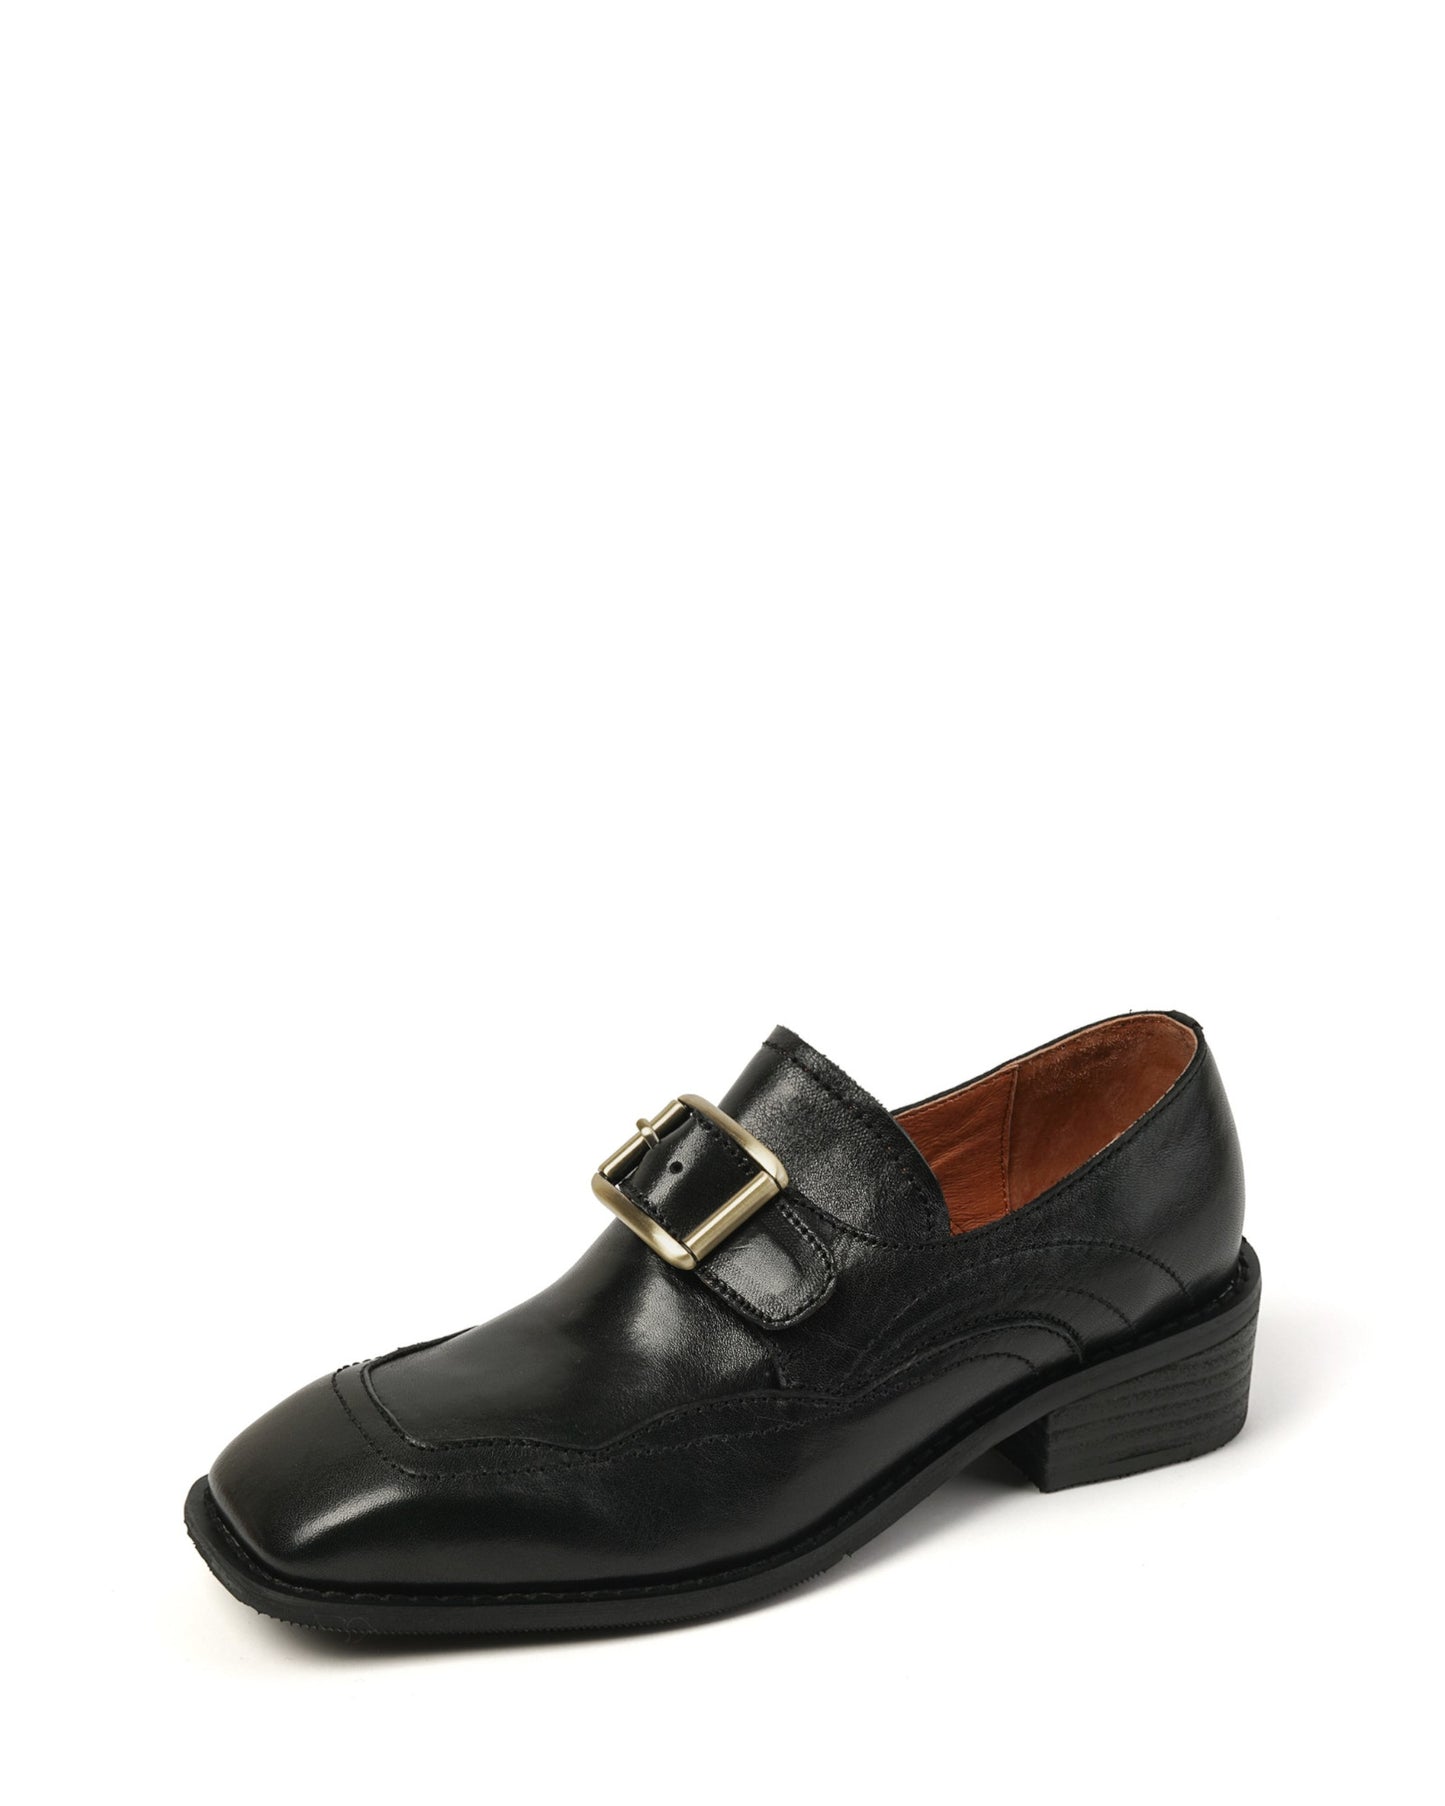 190-square-toe-black-leather-loafers